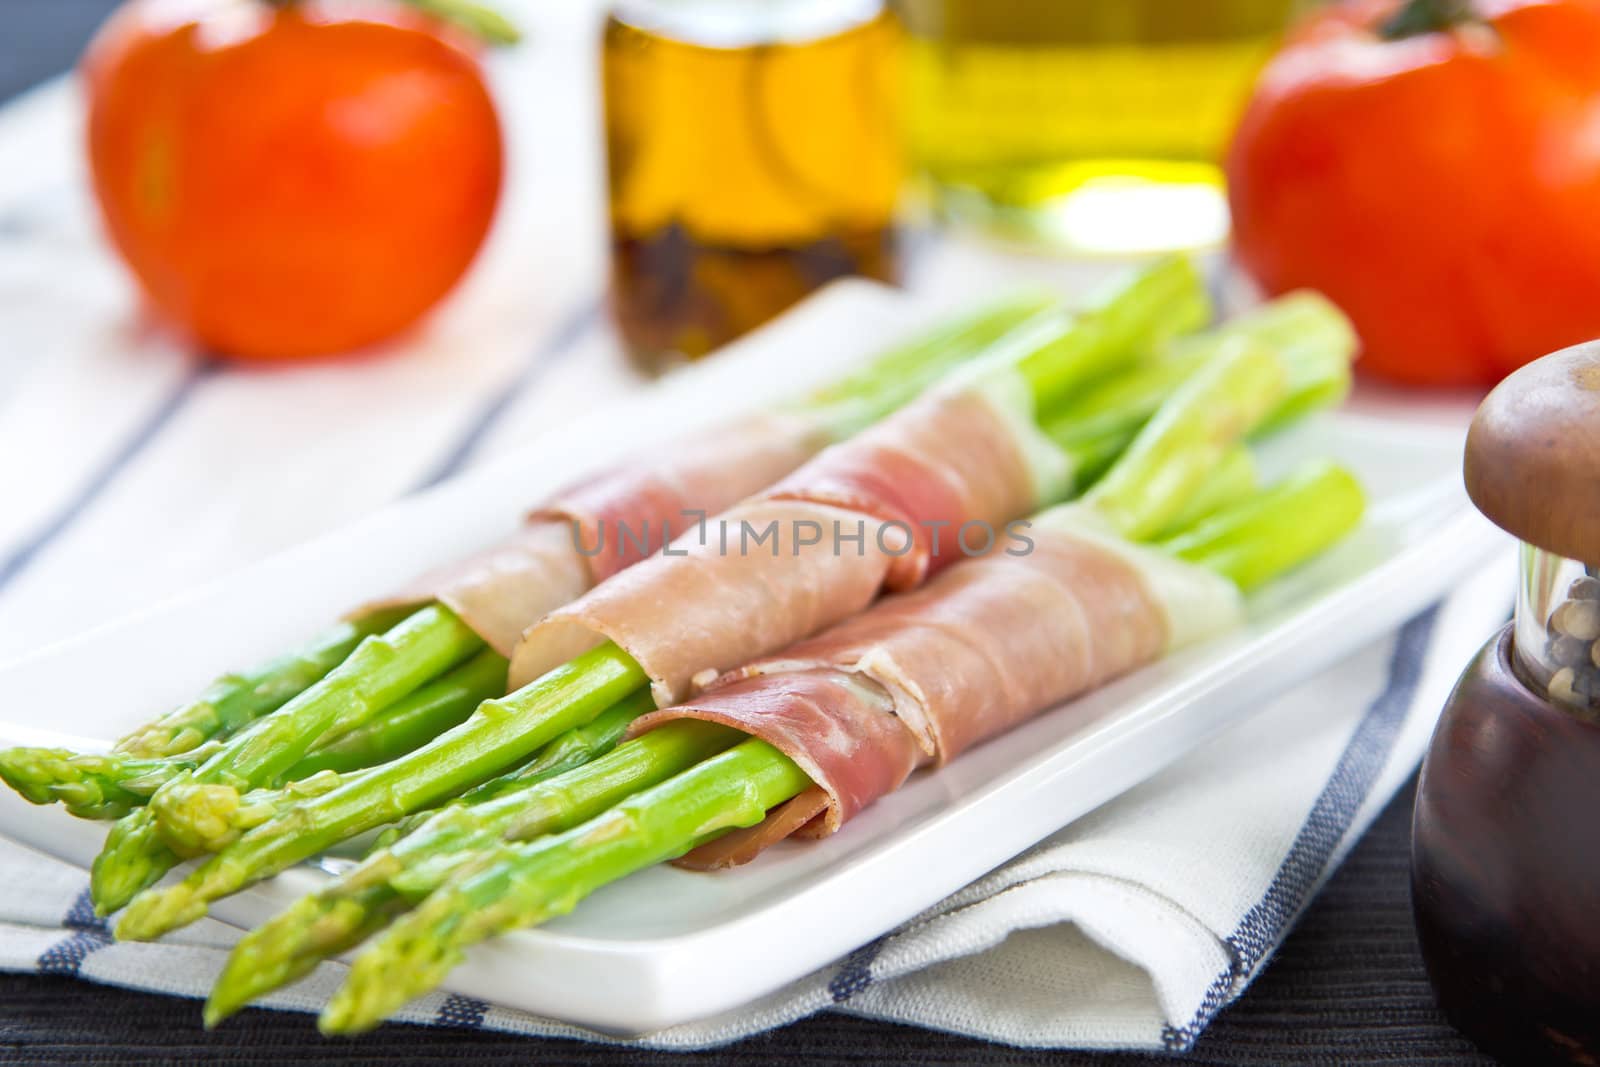 Asparagus wrapped in prosciutto by vanillaechoes